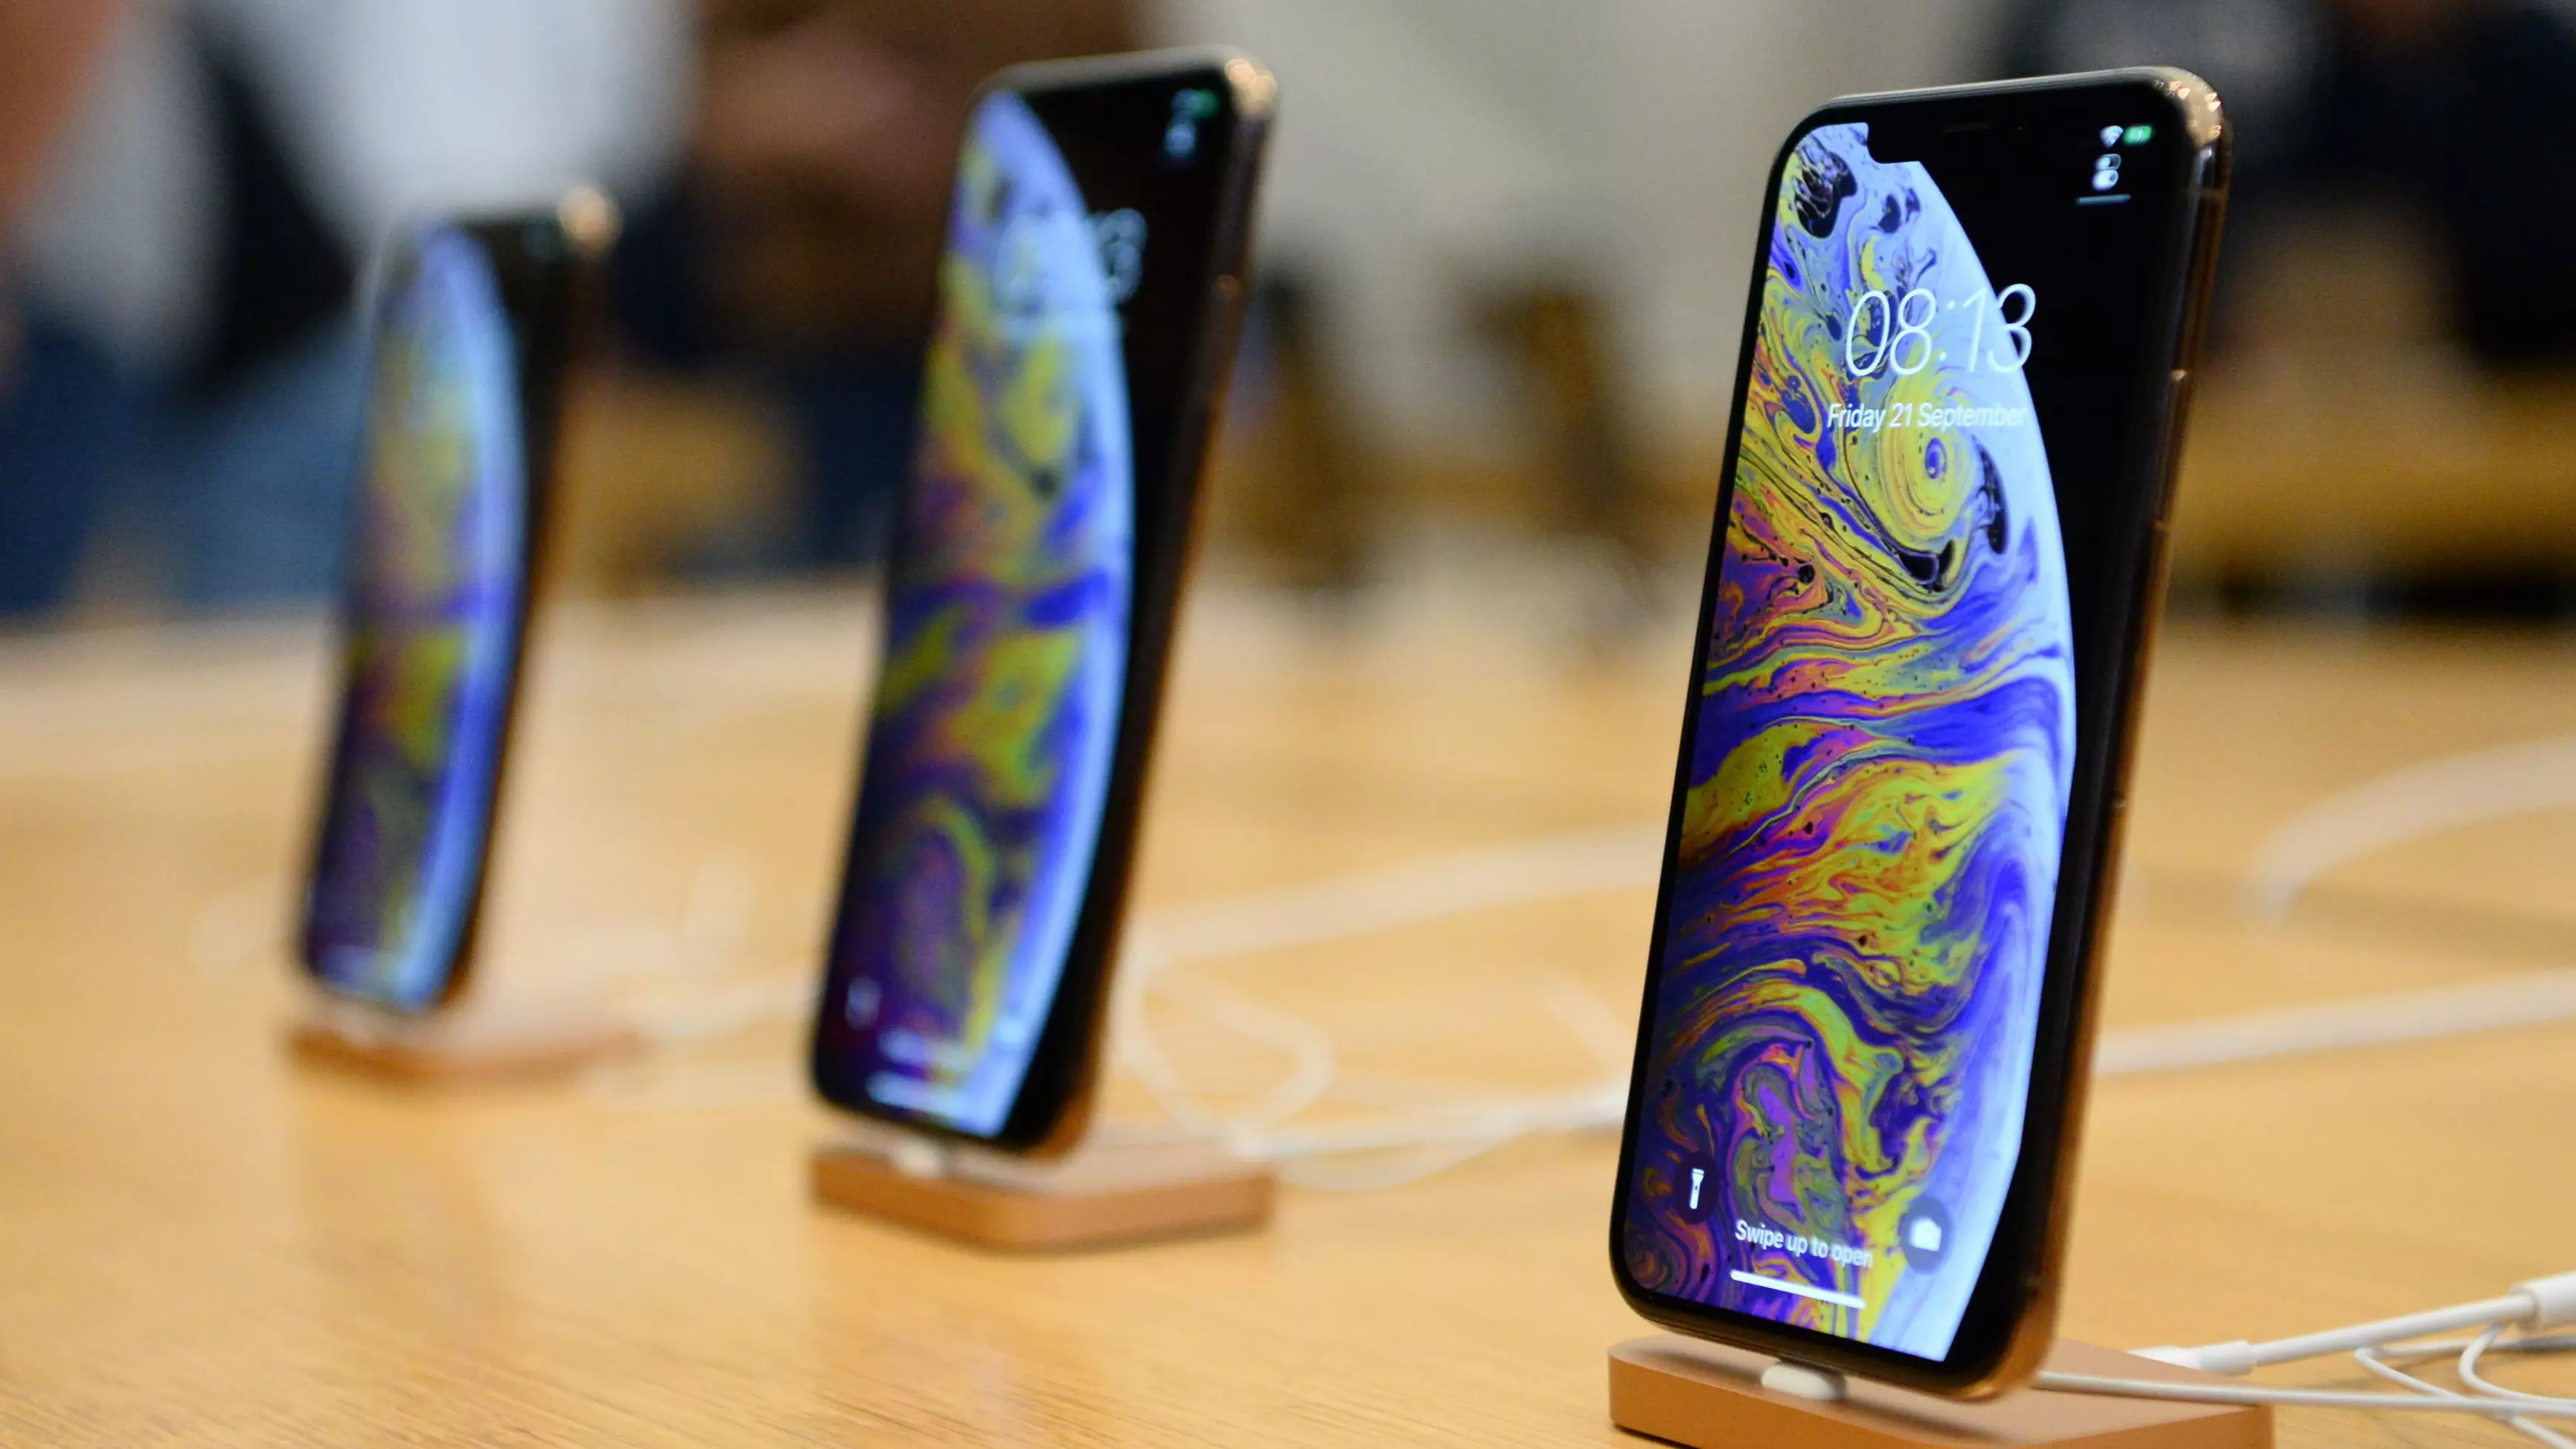 New 5G Apple iPhone XS Max To Have Gigantic Screen, Says Ming-Chi Kuo